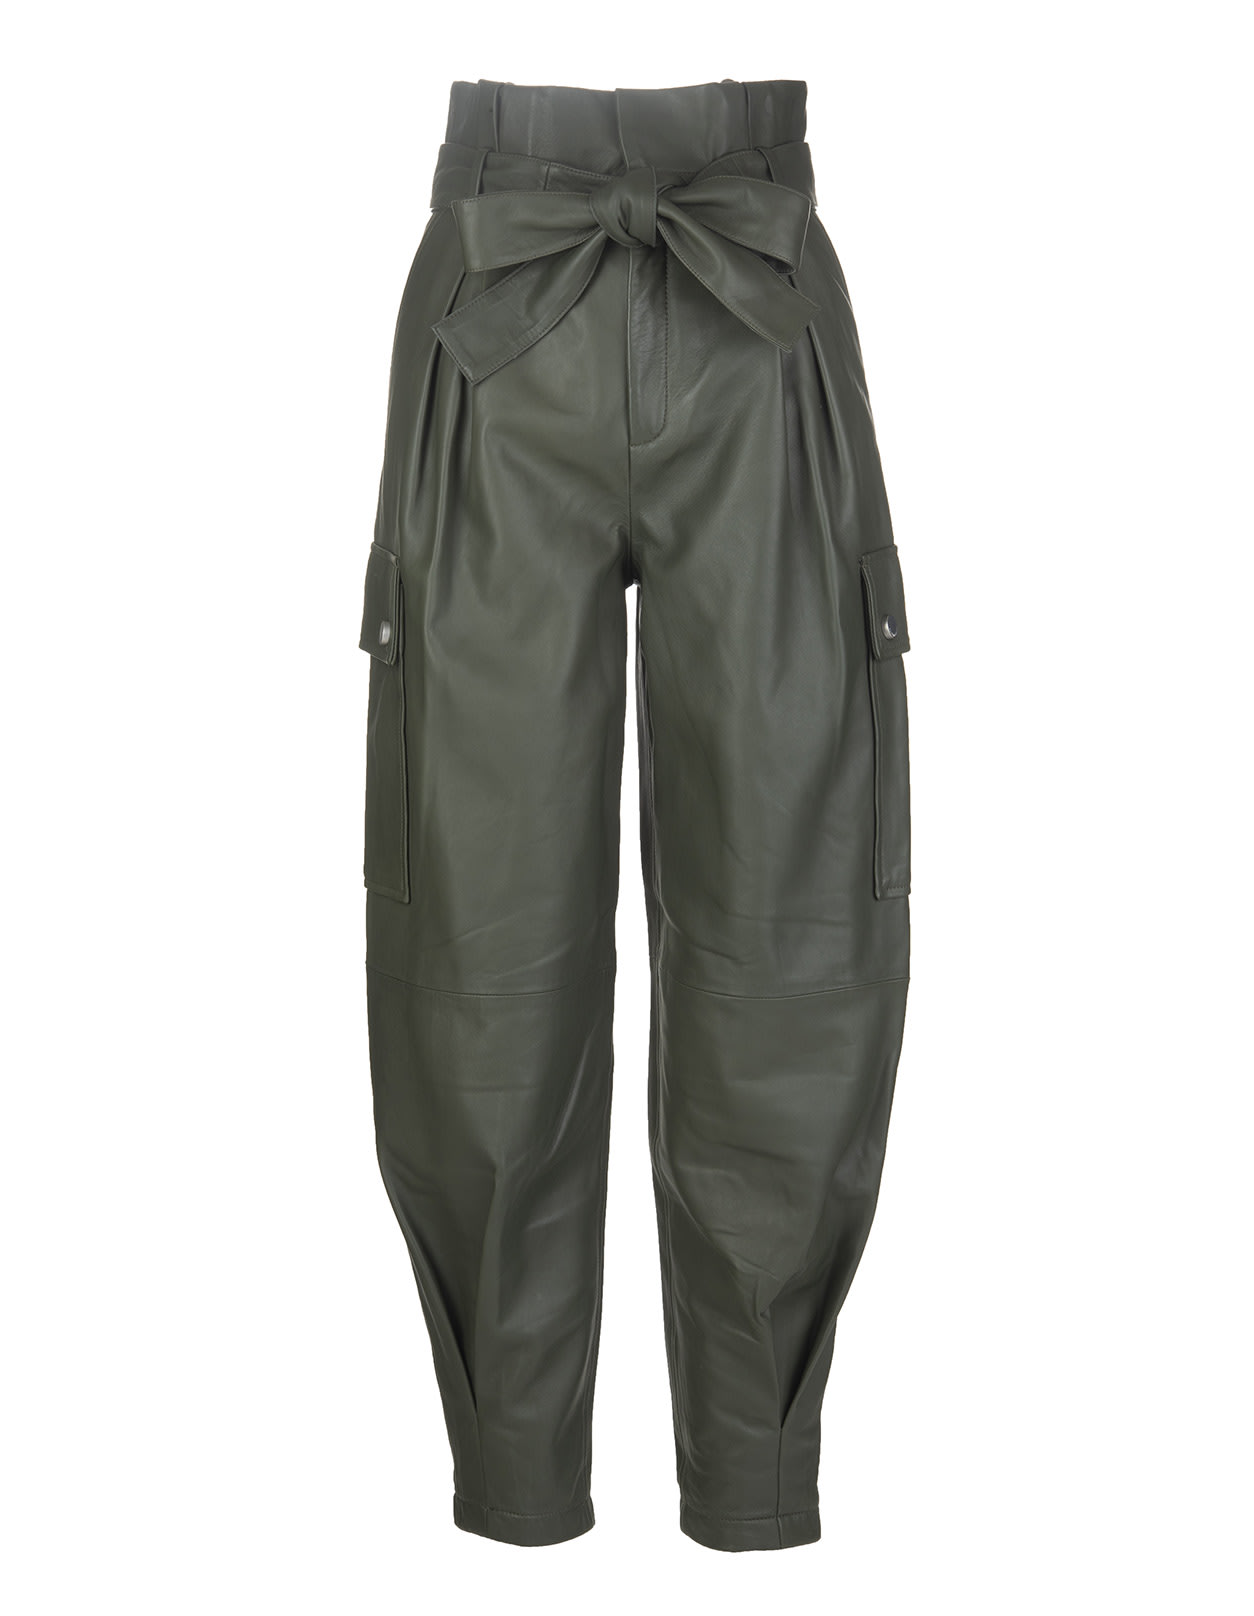 RED Valentino Military Green Leather Trousers With Belt